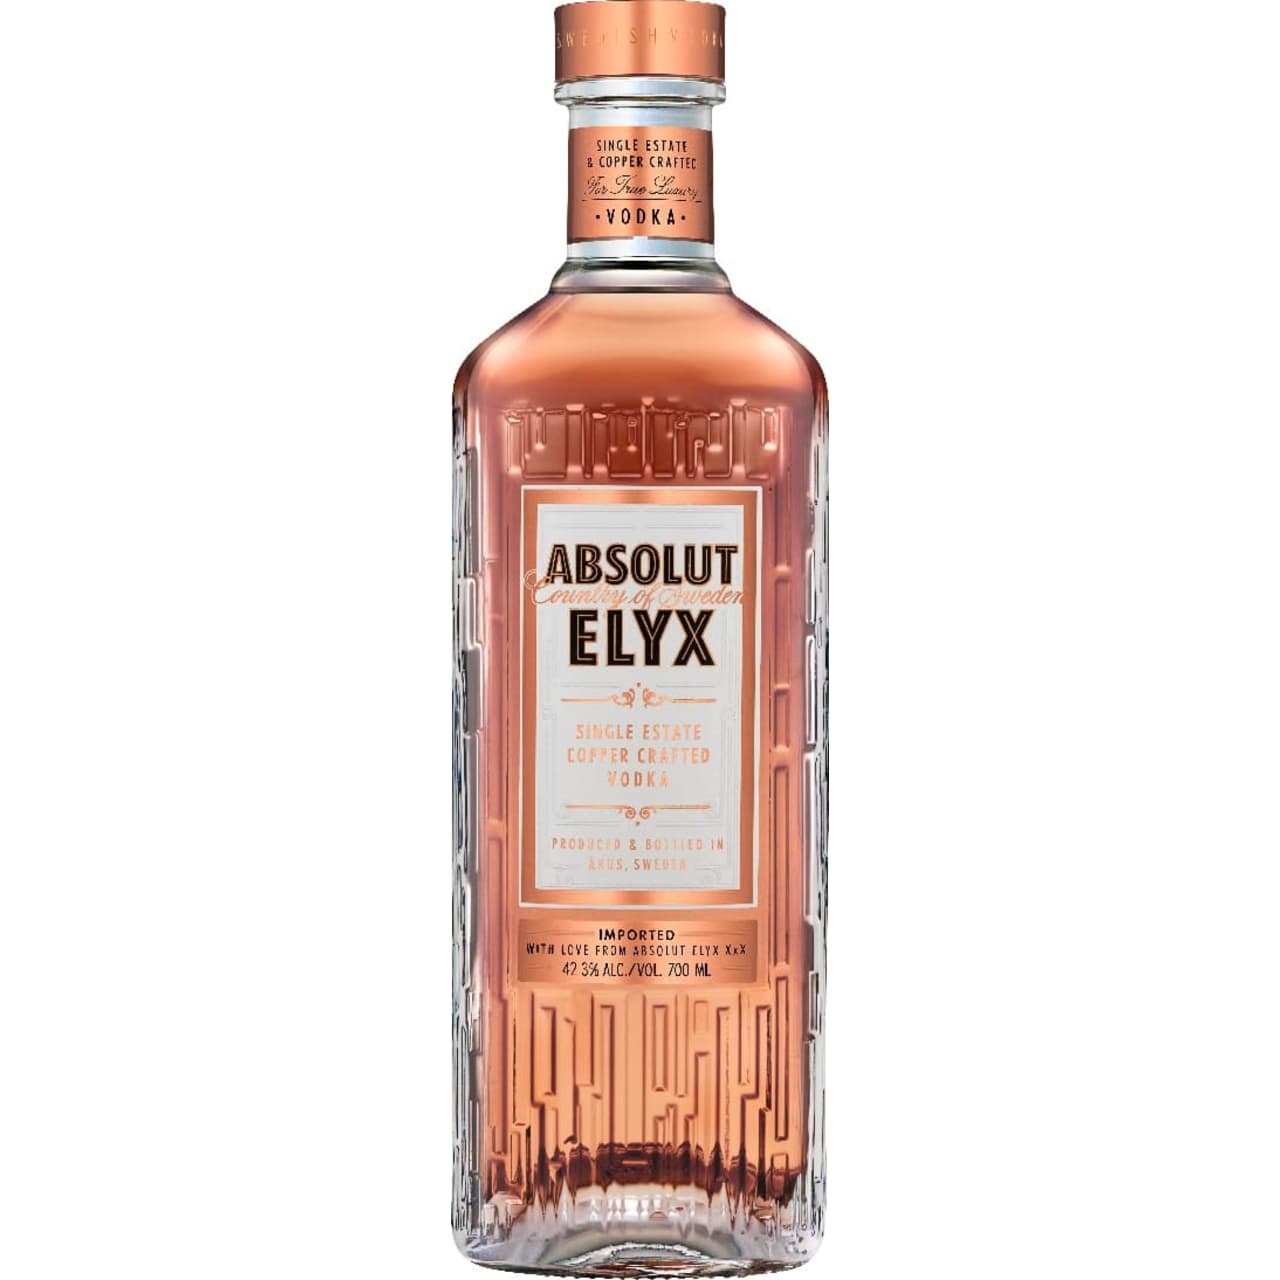 Crafted from single estate wheat and manually distilled in an authentic 1921 copper still, this vodka, the finest expression of Absolut, is defined by its exceptional purity and silky texture.